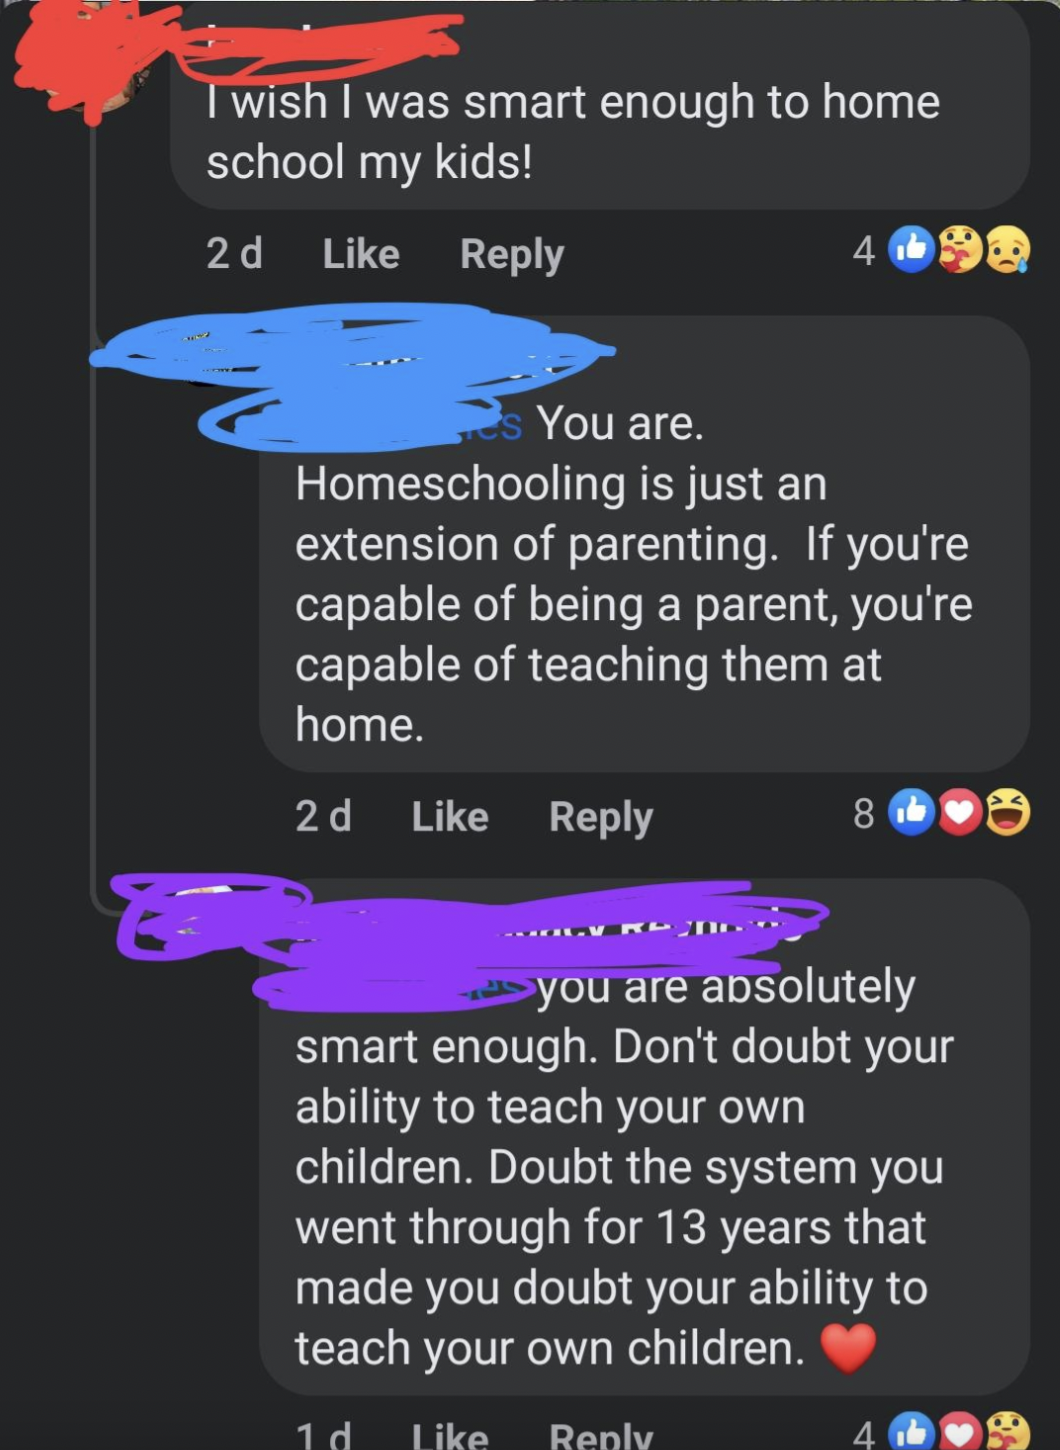 screenshot - I wish I was smart enough to home school my kids! 2d 491 You are. Homeschooling is just an extension of parenting. If you're capable of being a parent, you're capable of teaching them at home. 2d 8 you are absolutely smart enough. Don't doubt